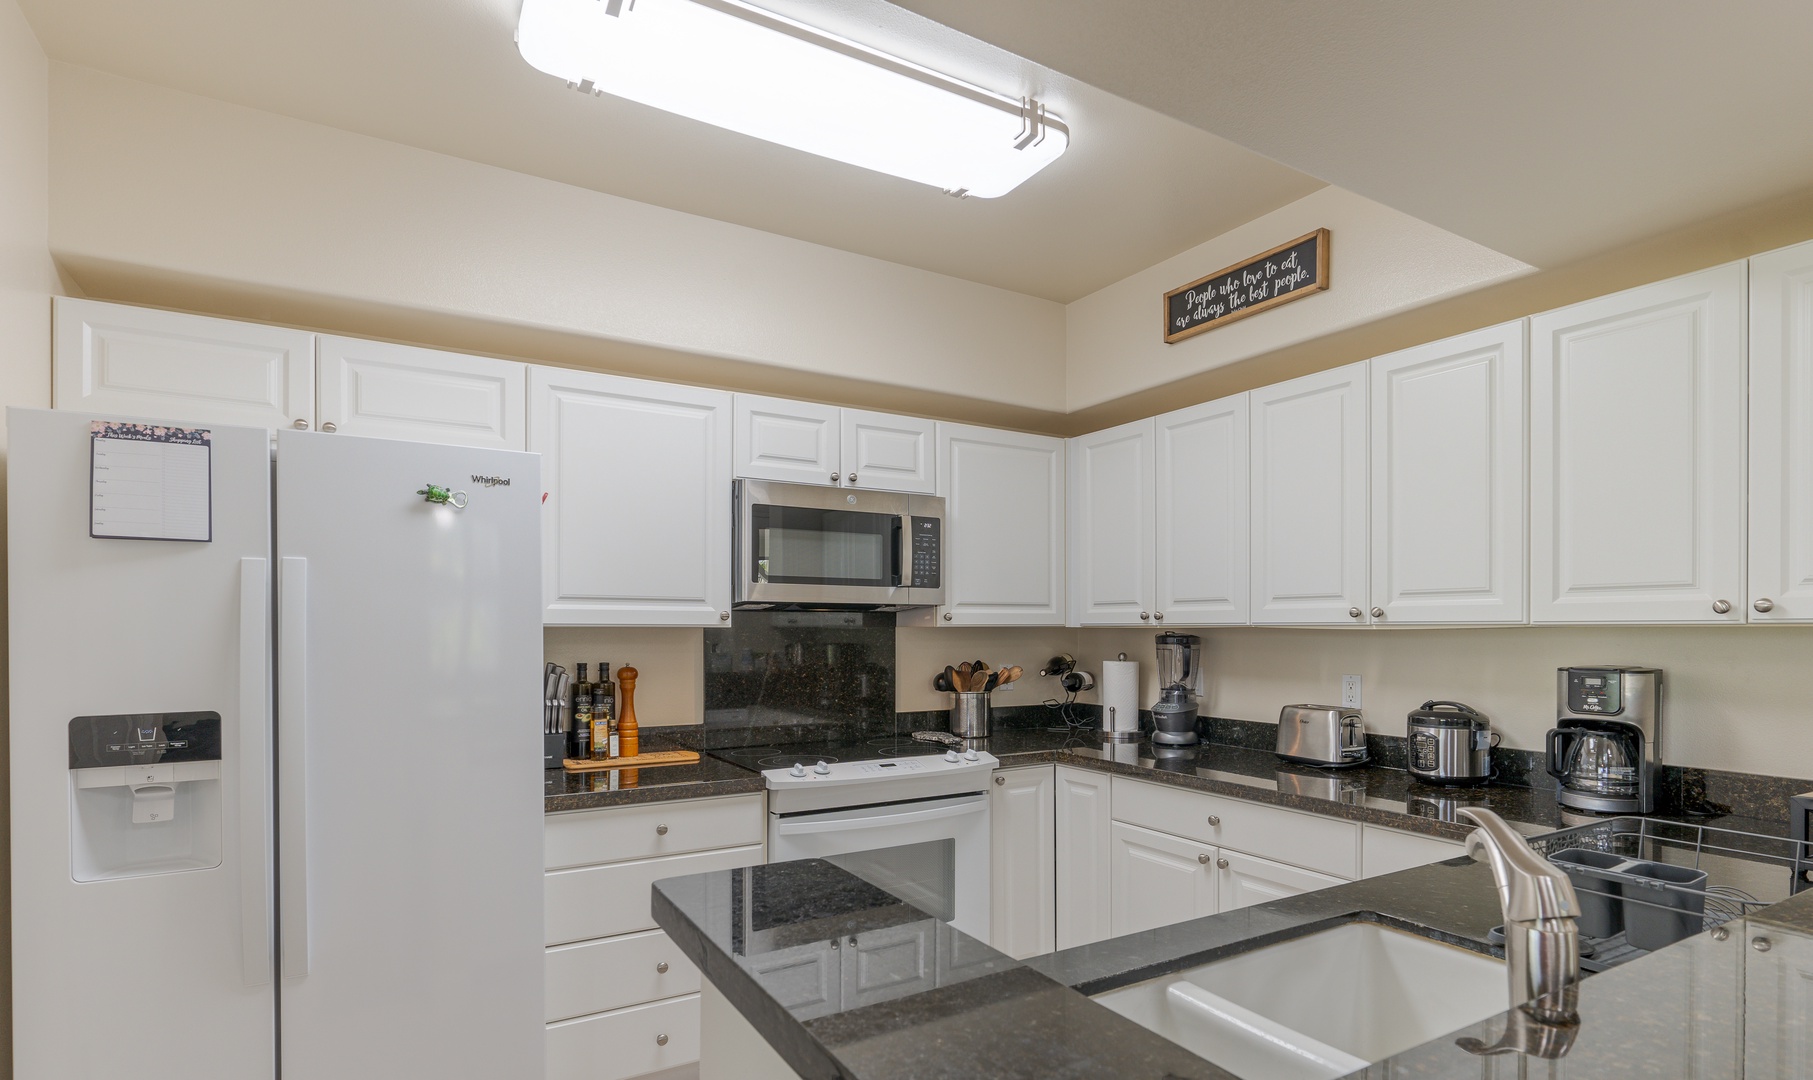 Kapolei Vacation Rentals, Ko Olina Kai 1027A - The kitchen has all the amenities for your culinary adventures.